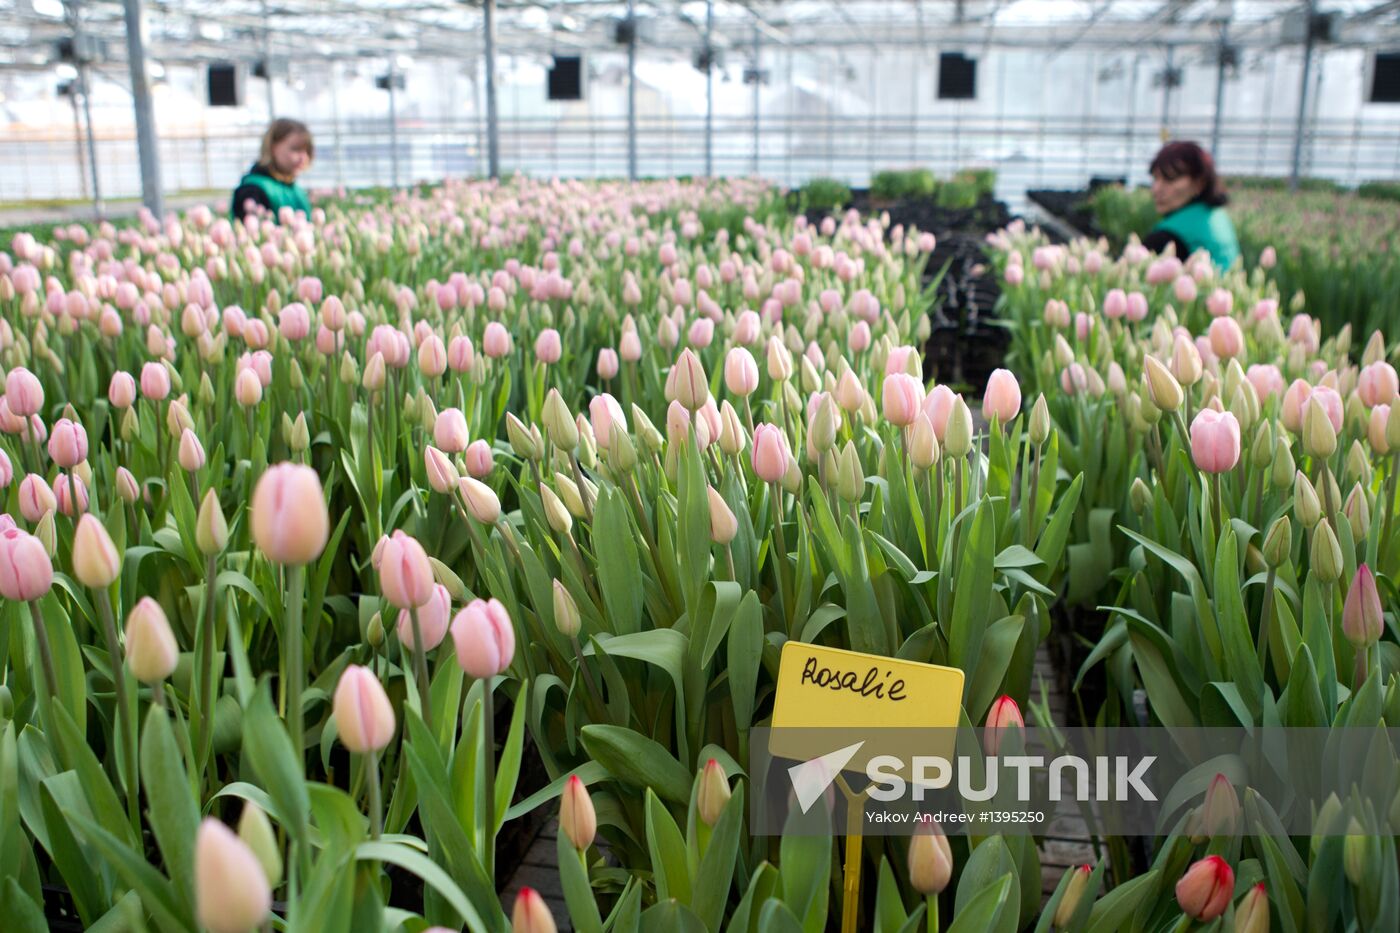 Growing flowers in greenhouse facility in Tomsk